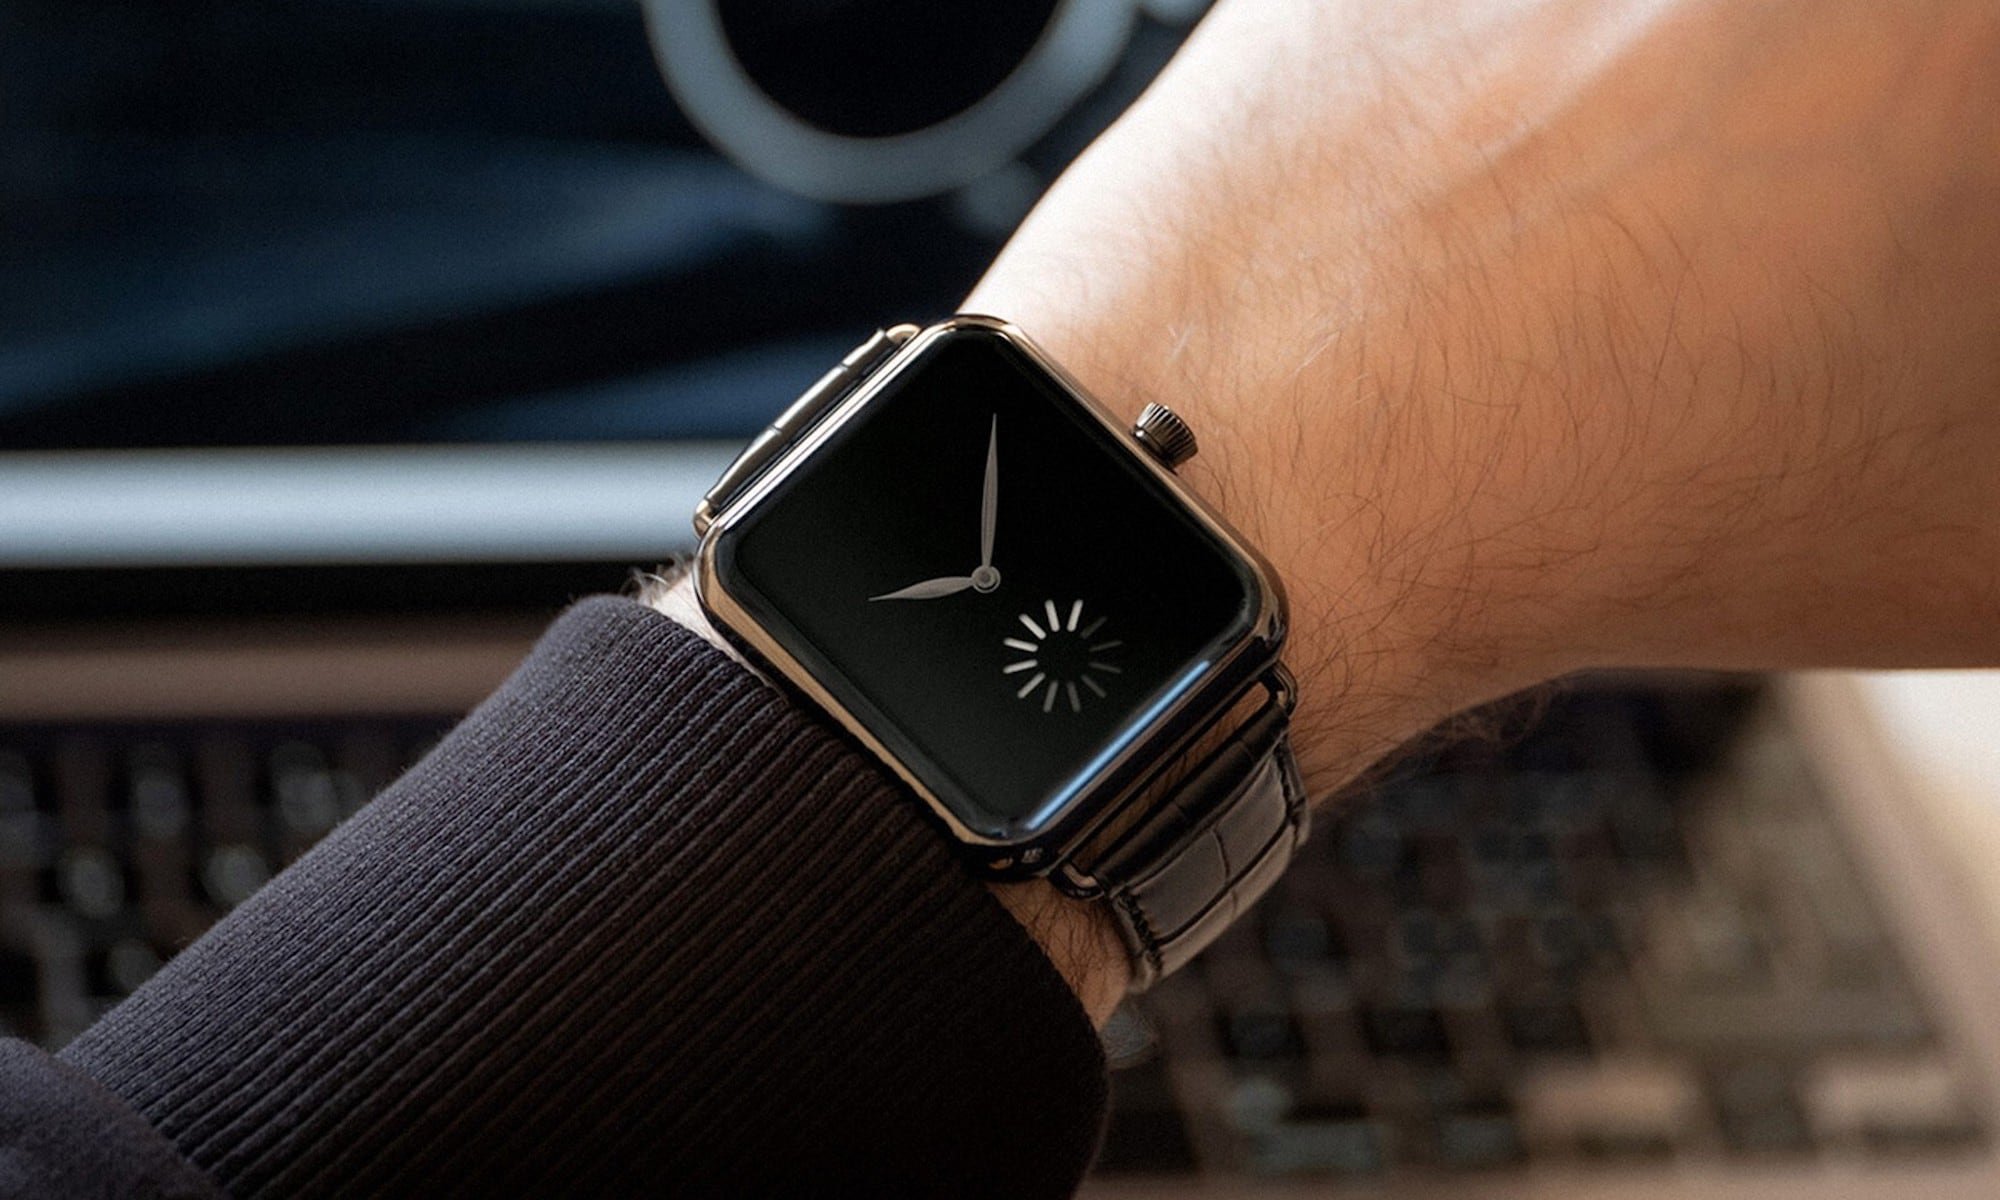 This $30,800 watch mimics the Apple Watch with a mechanical loading wheel